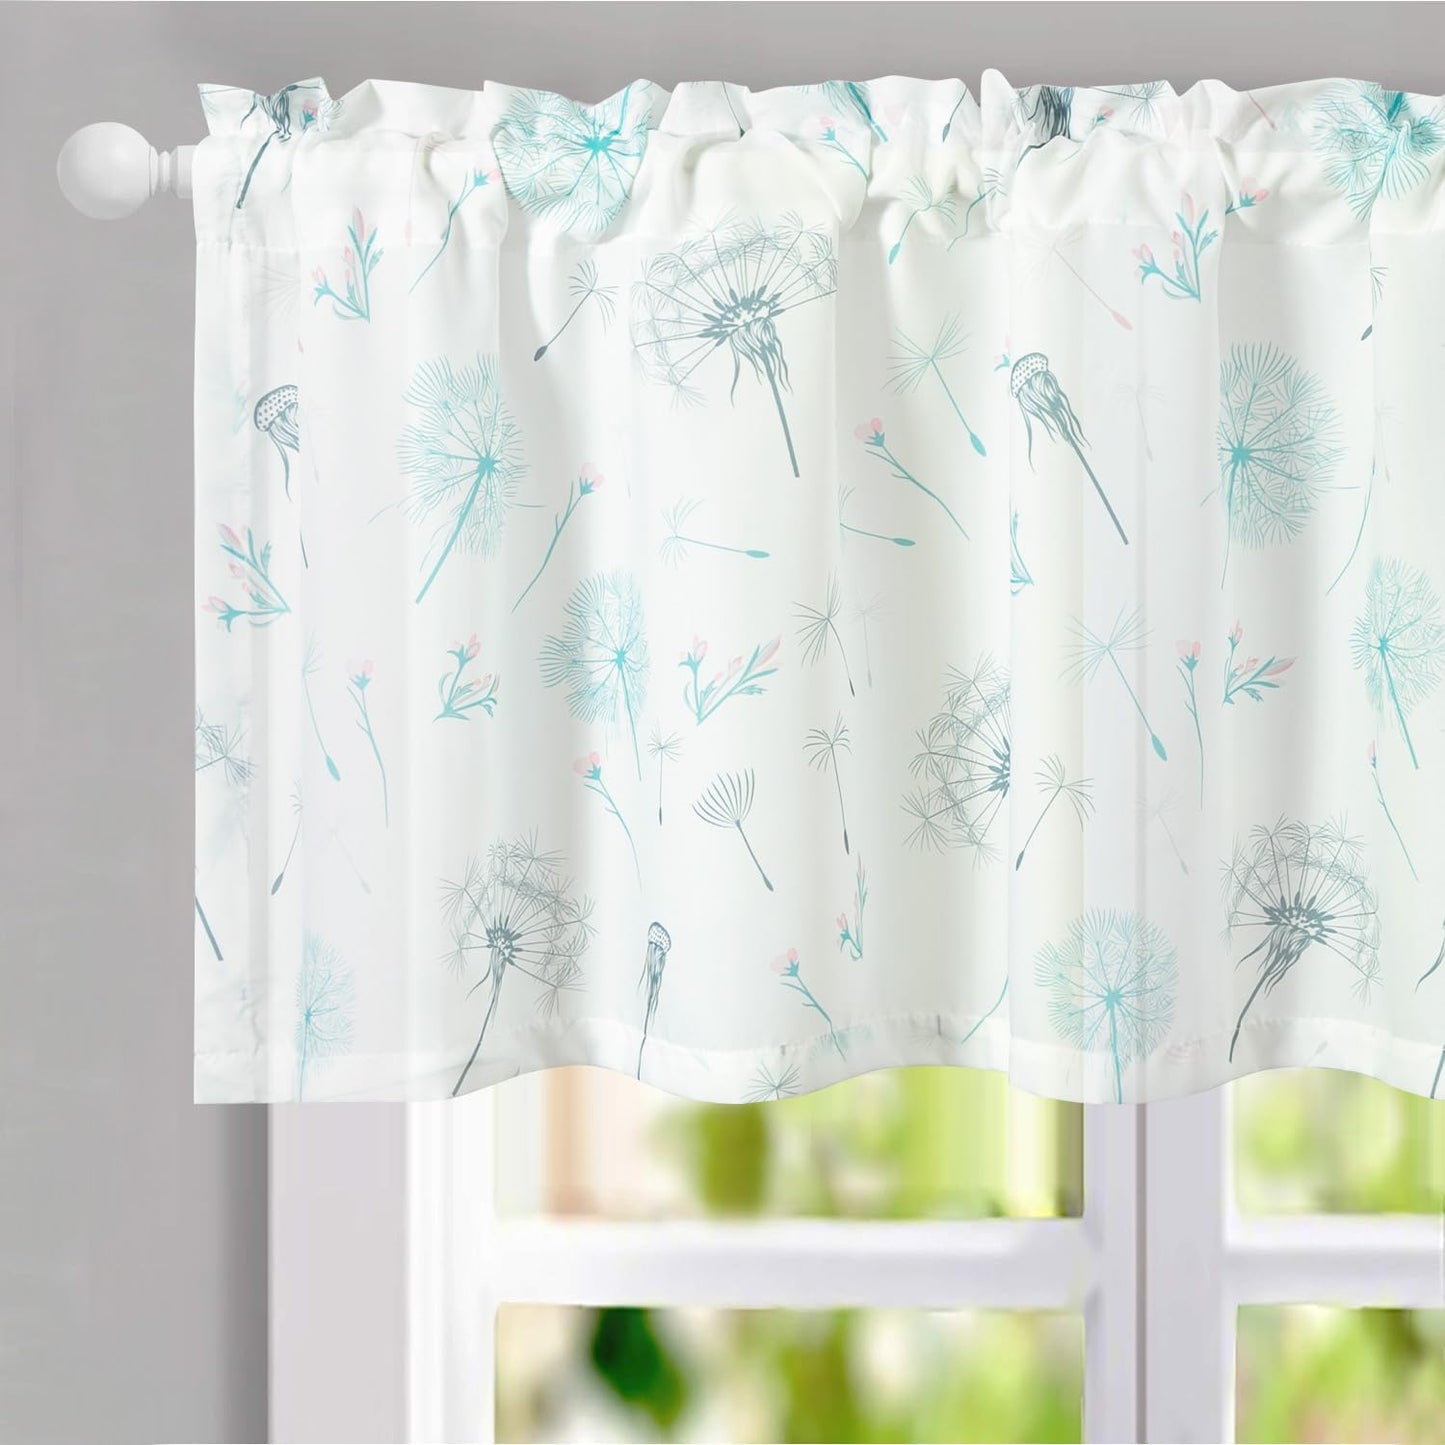 VOGOL Colorful Floral Print Tier Curtains, 2 Panels Smooth Textured Decorative Cafe Curtain, Rod Pocket Sheer Drapery for Farmhouse, W 30 X L 24  VOGOL Mn008 W52 X L18 